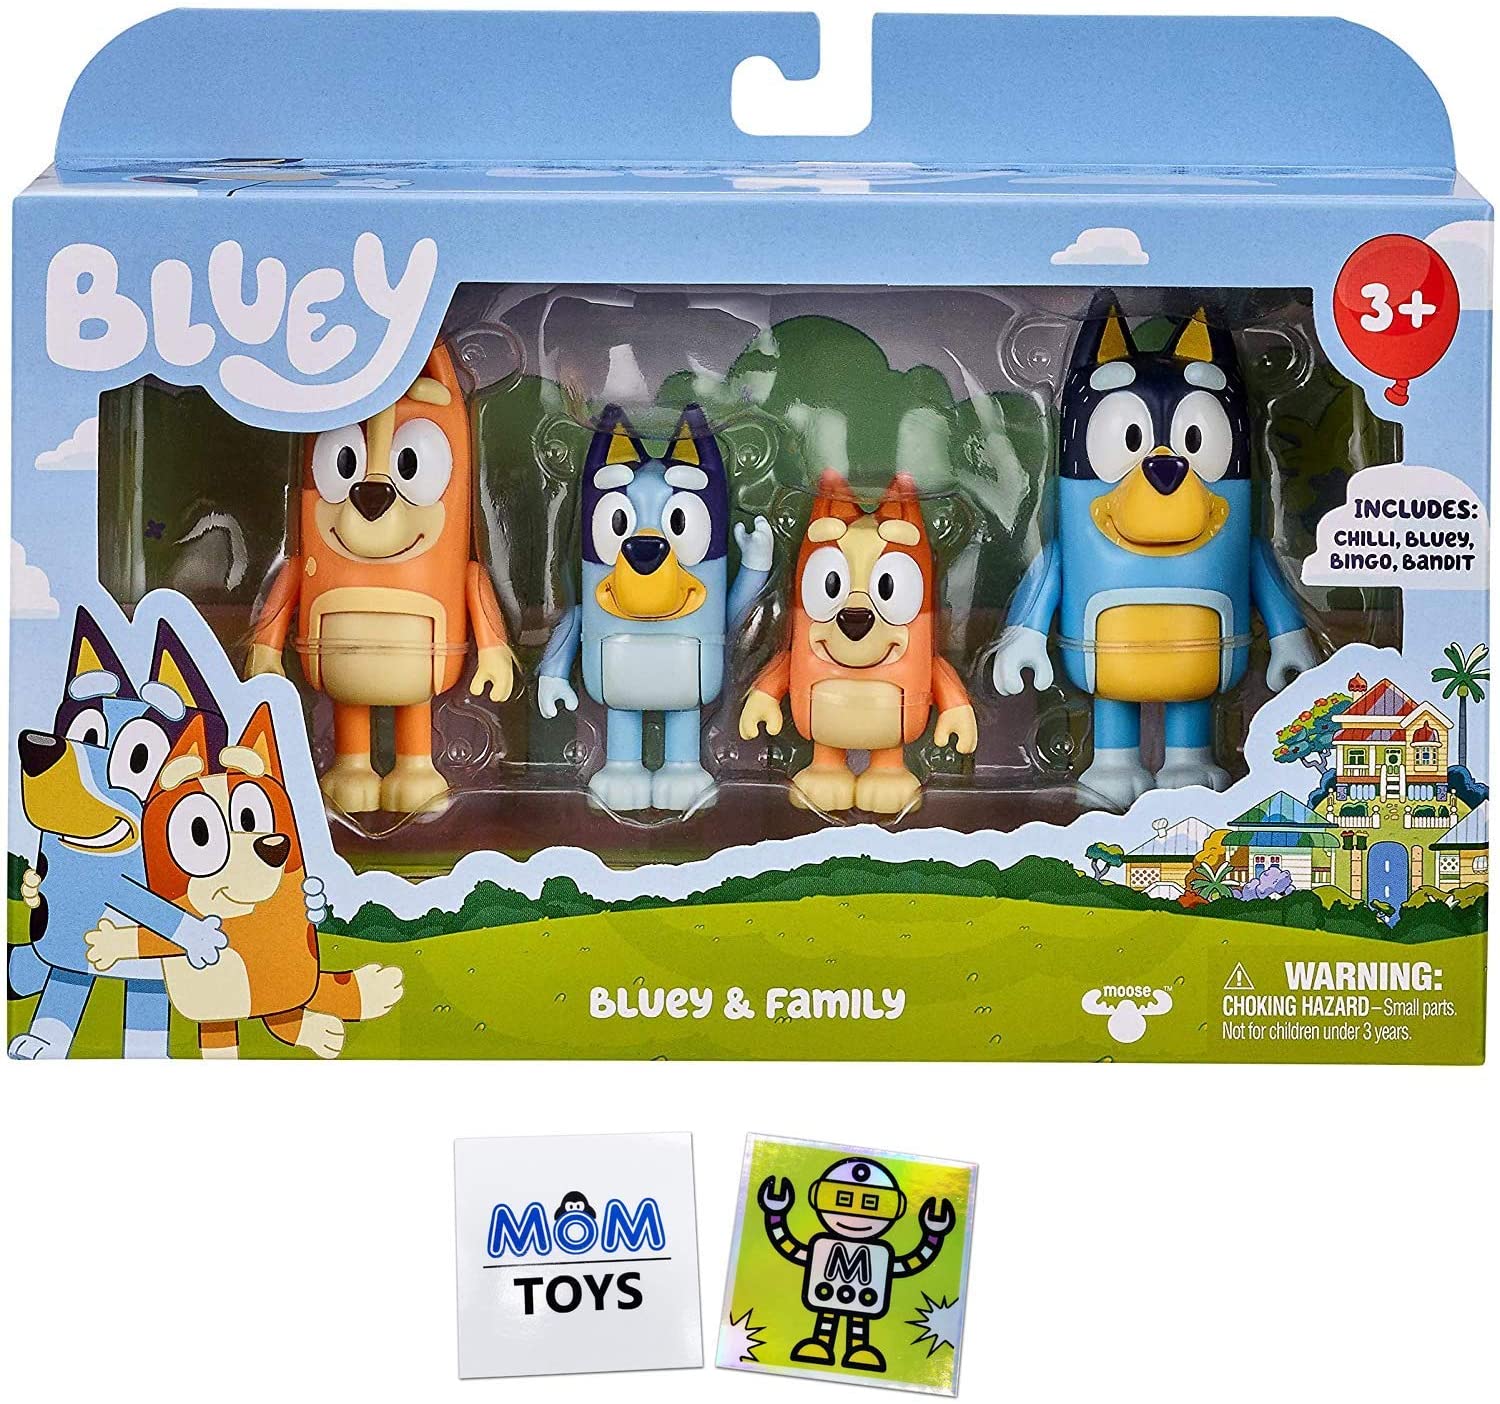 Bluey Family and Friends 4 Pack with 2 My Outlet Mall Stickers